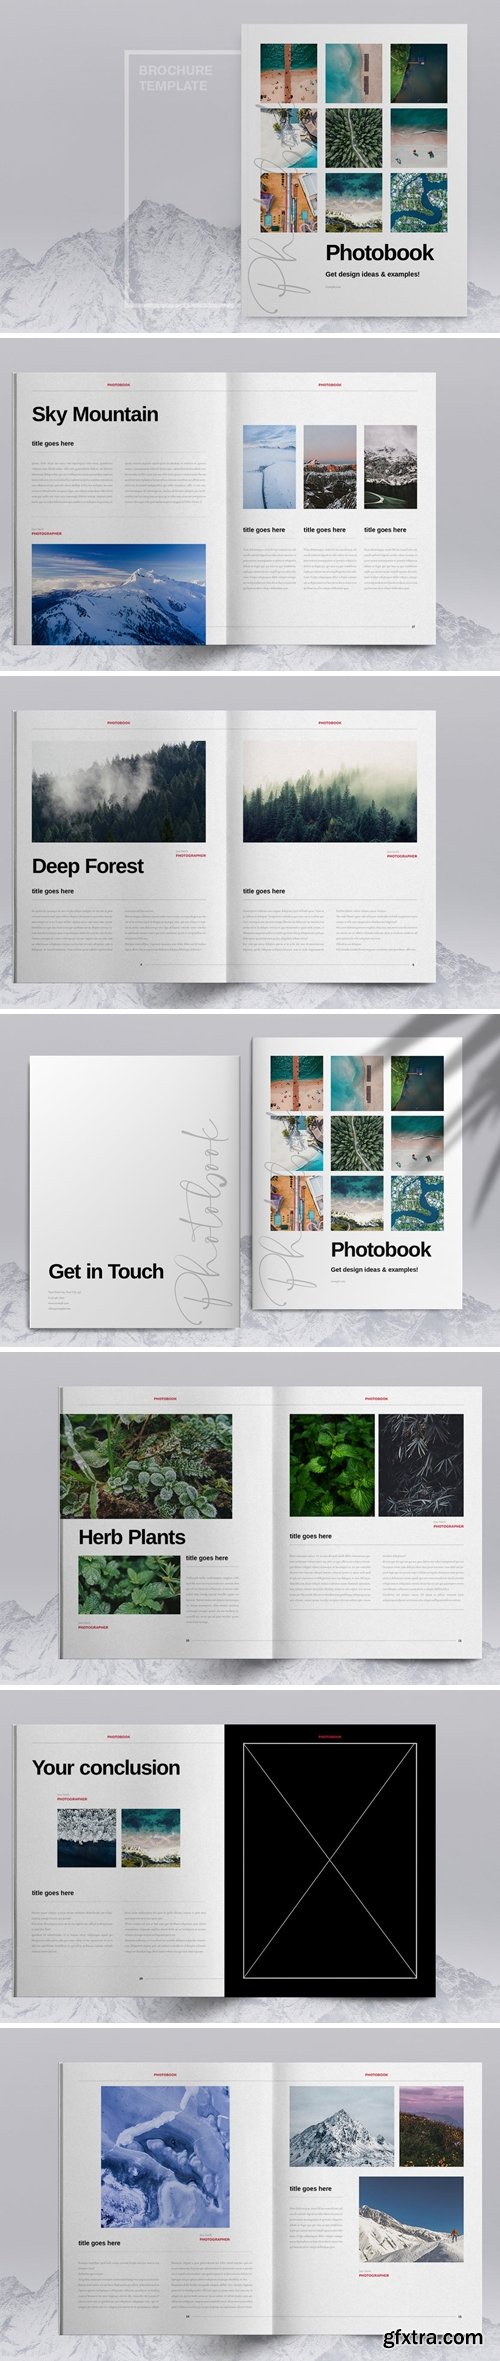 Colorful Photobook Template